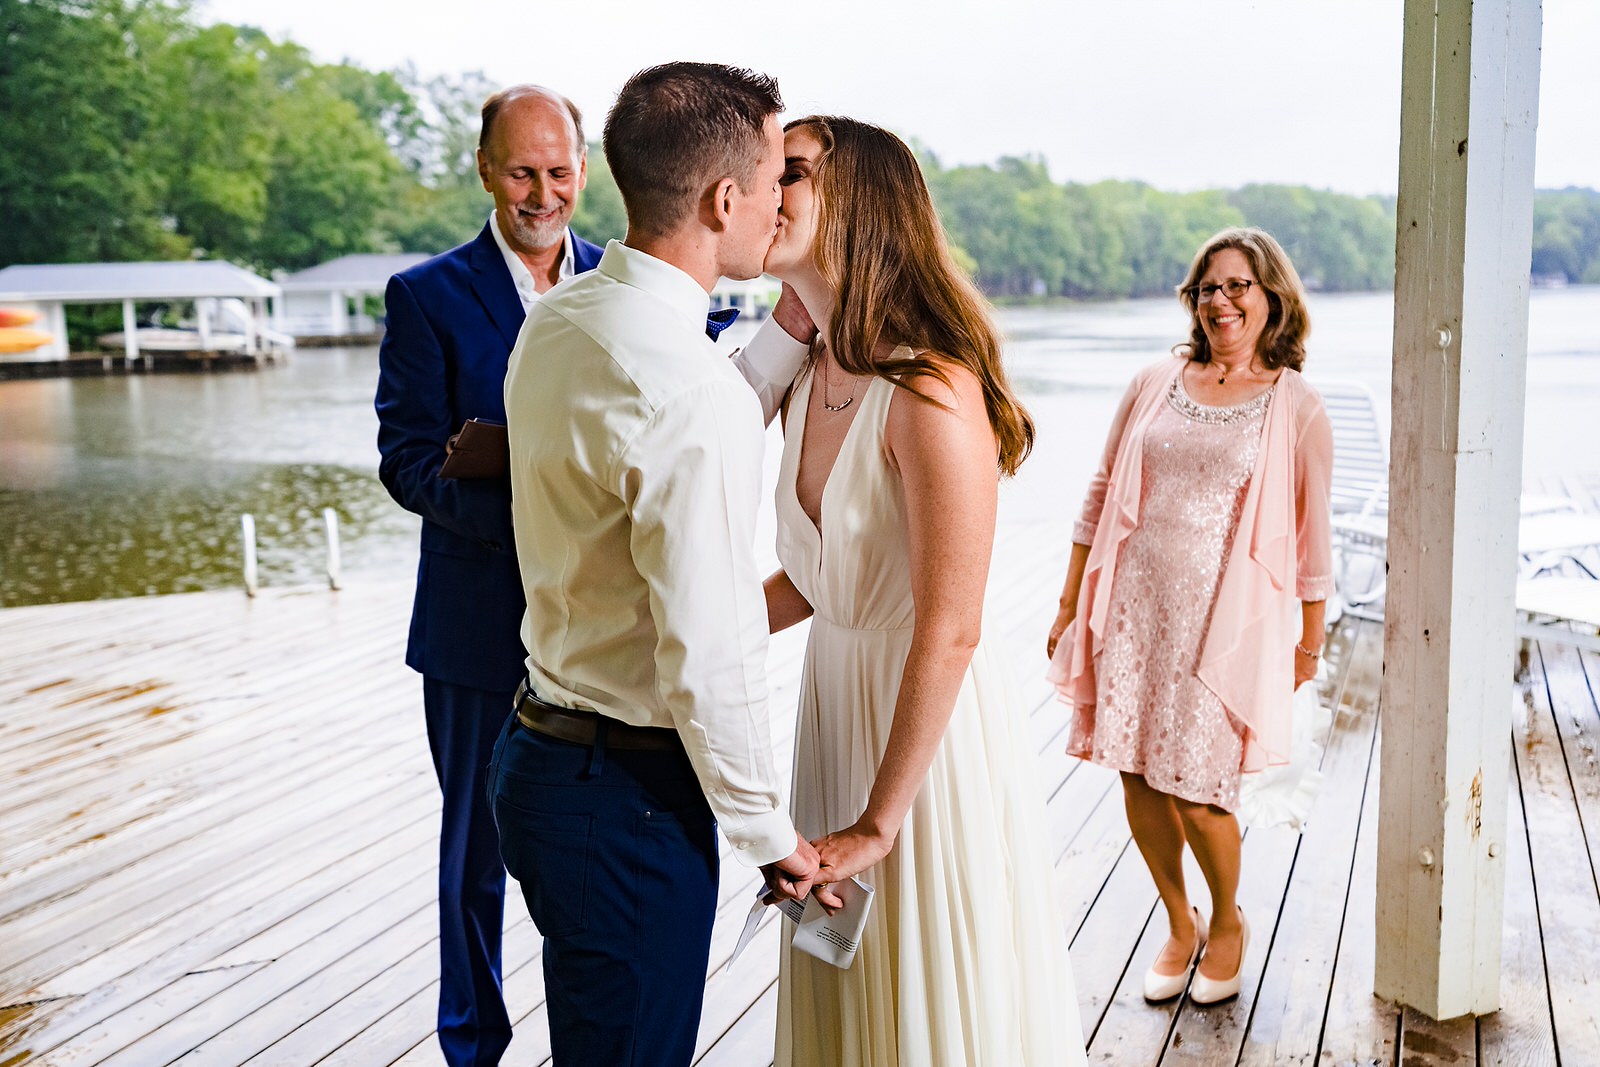 bride and groom share their first kiss at their micro wedding ceremony